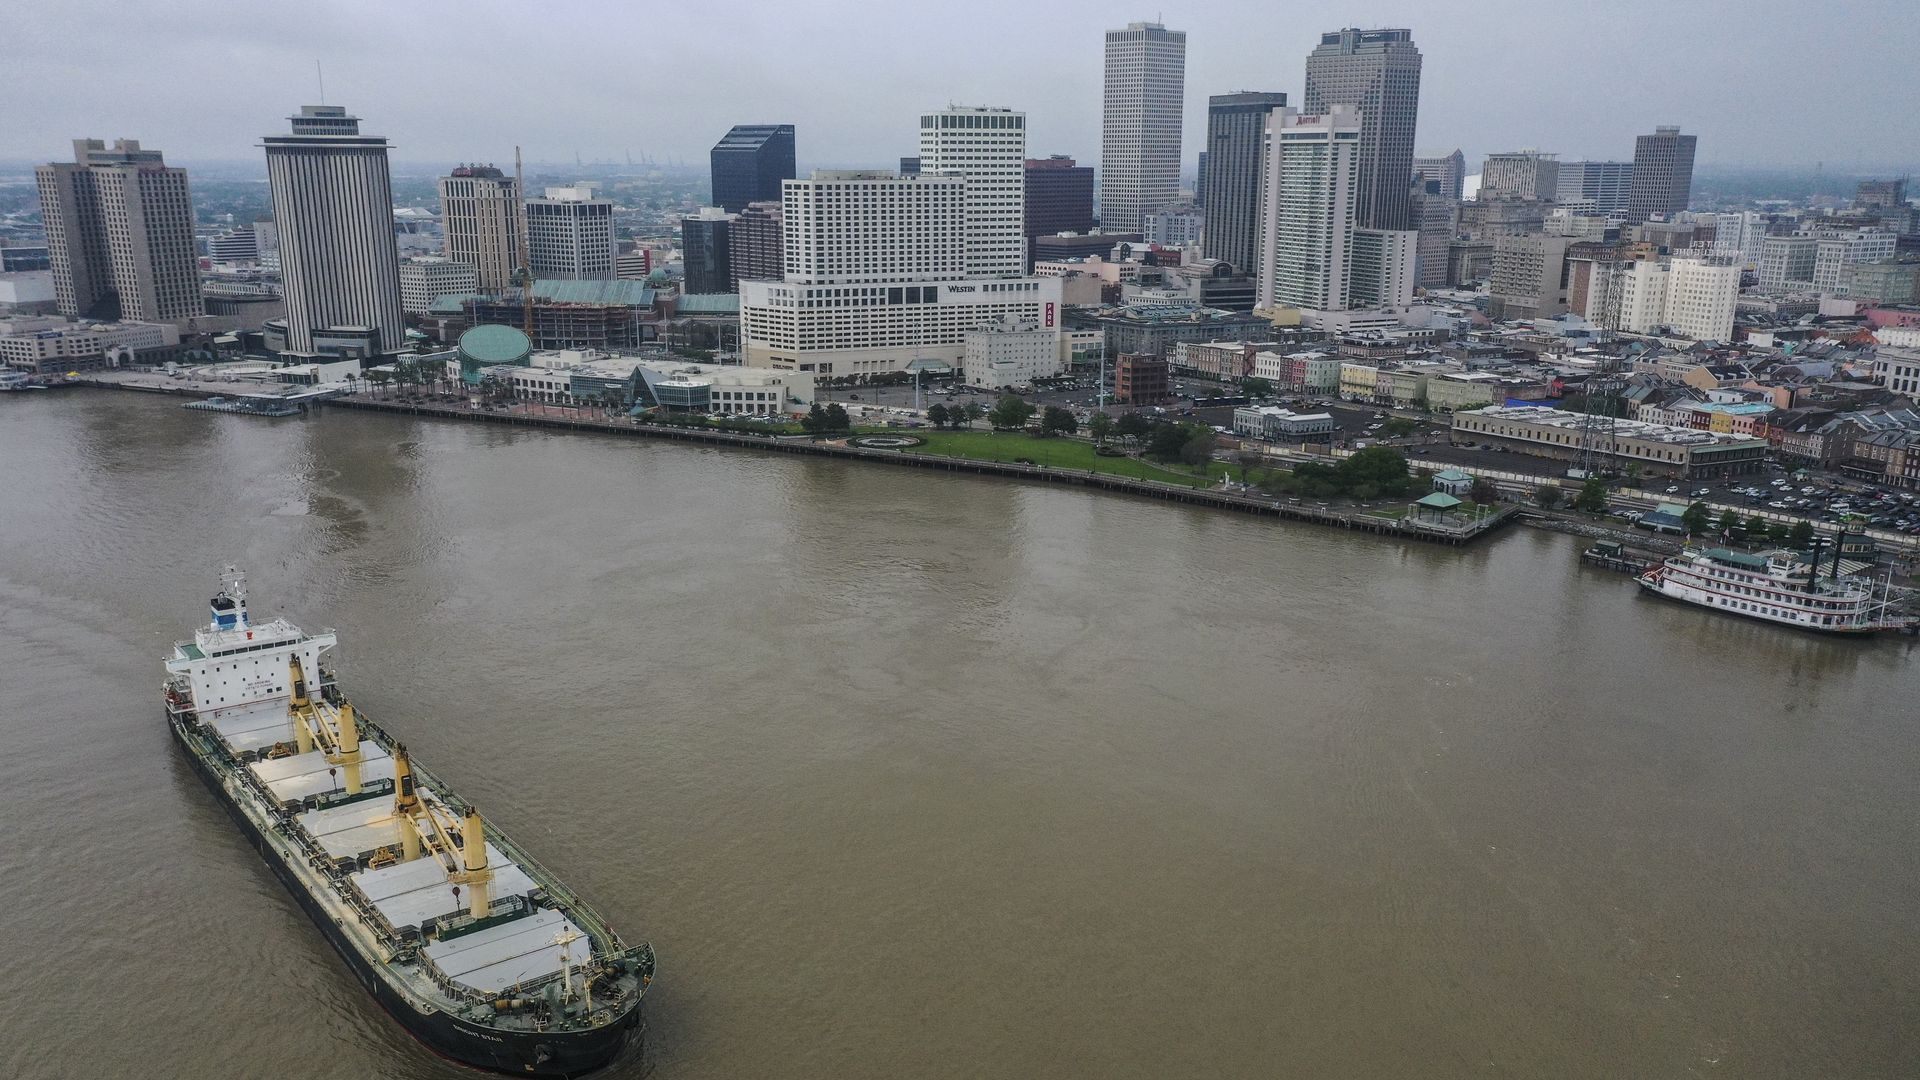 Photo shows the Mississippi River with the New Orleans skyline in the background